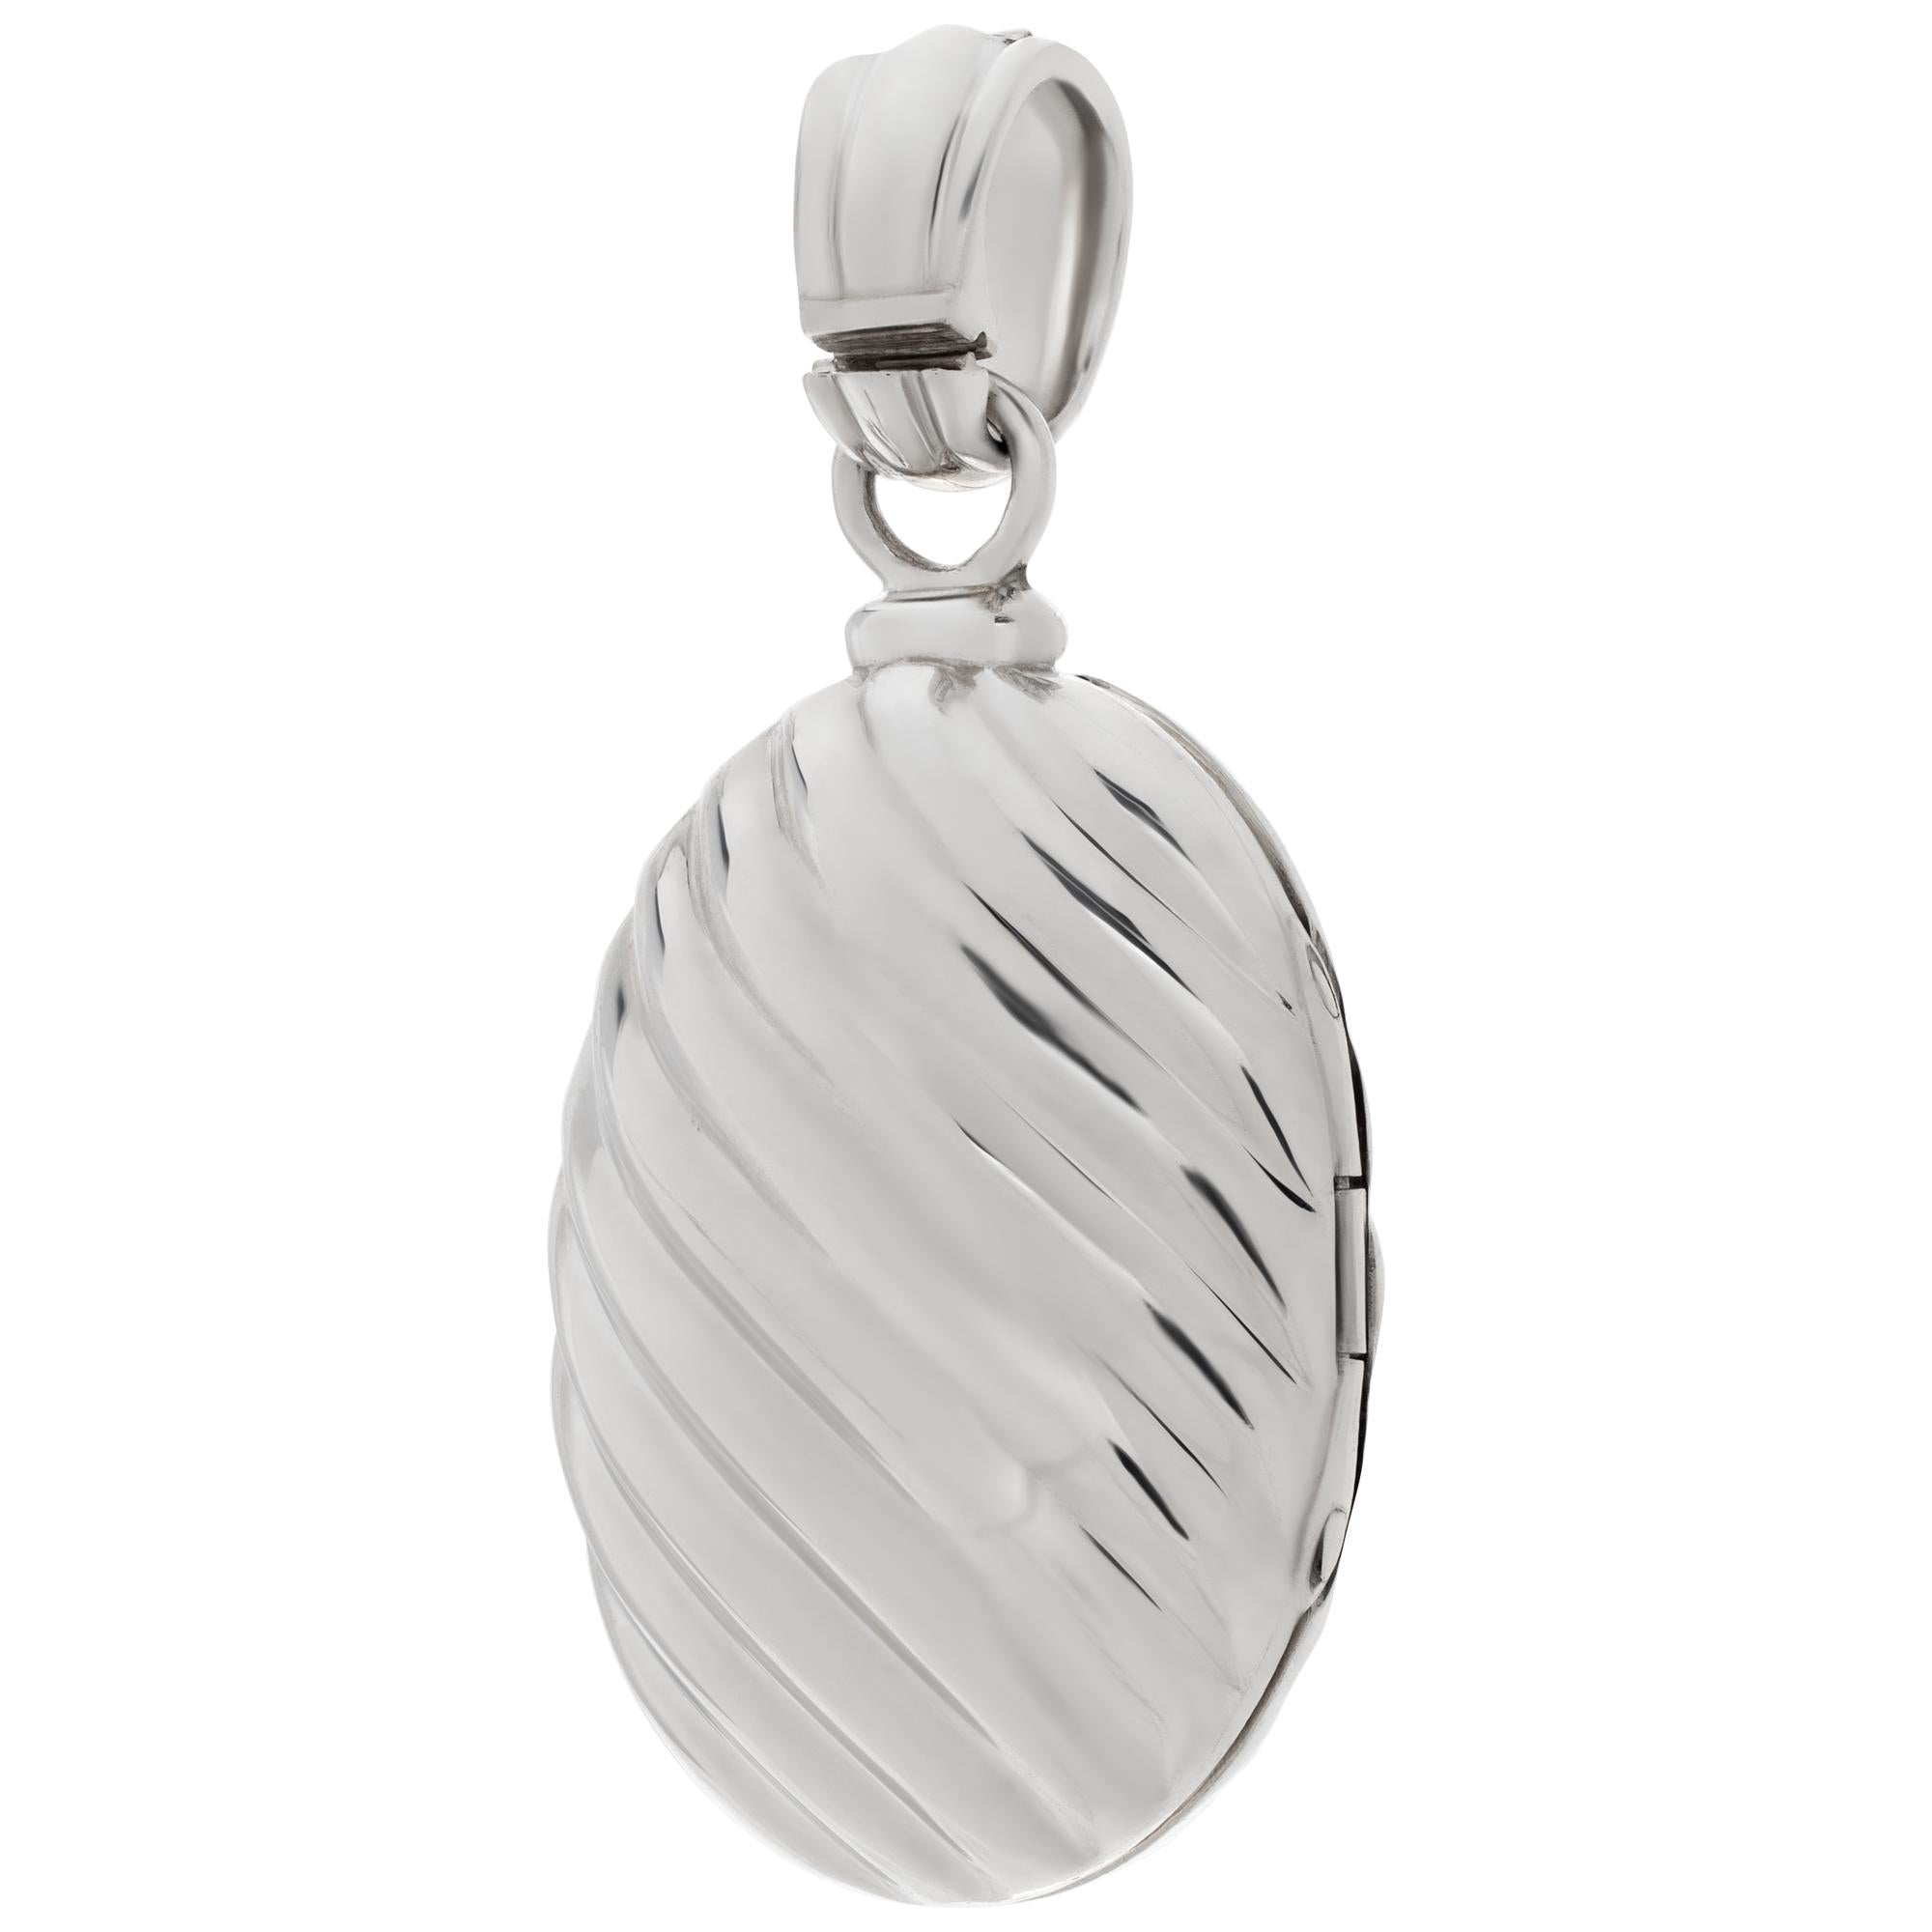 David Yurman Locket Pendant in 925 Sterling Silver and 18k Yellow Gold In Excellent Condition For Sale In Surfside, FL